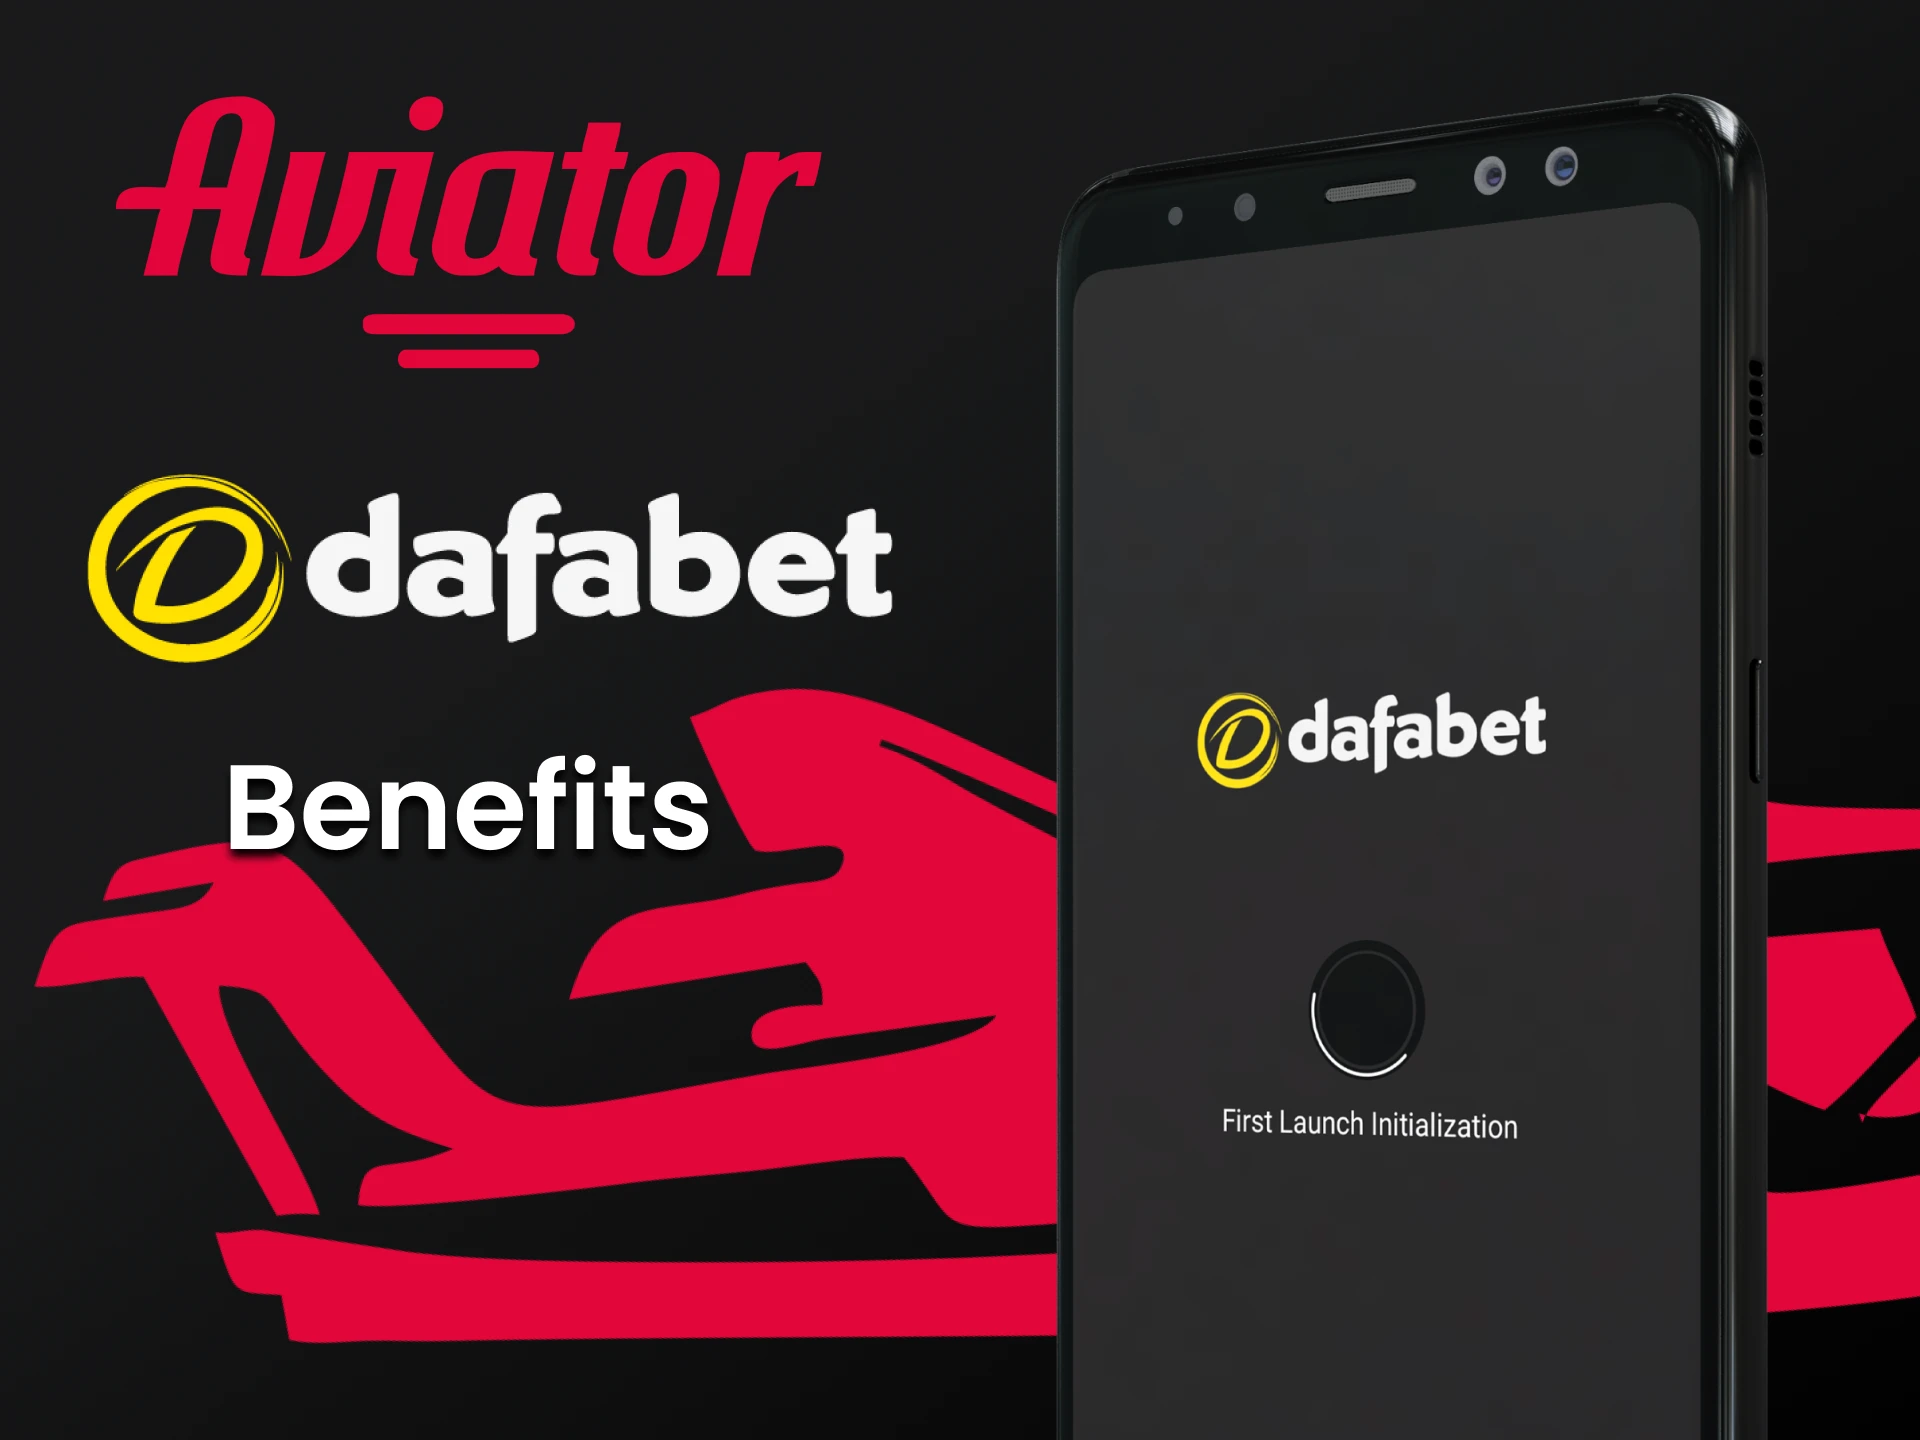 The Dafabet app will pleasantly surprise you with its quality.